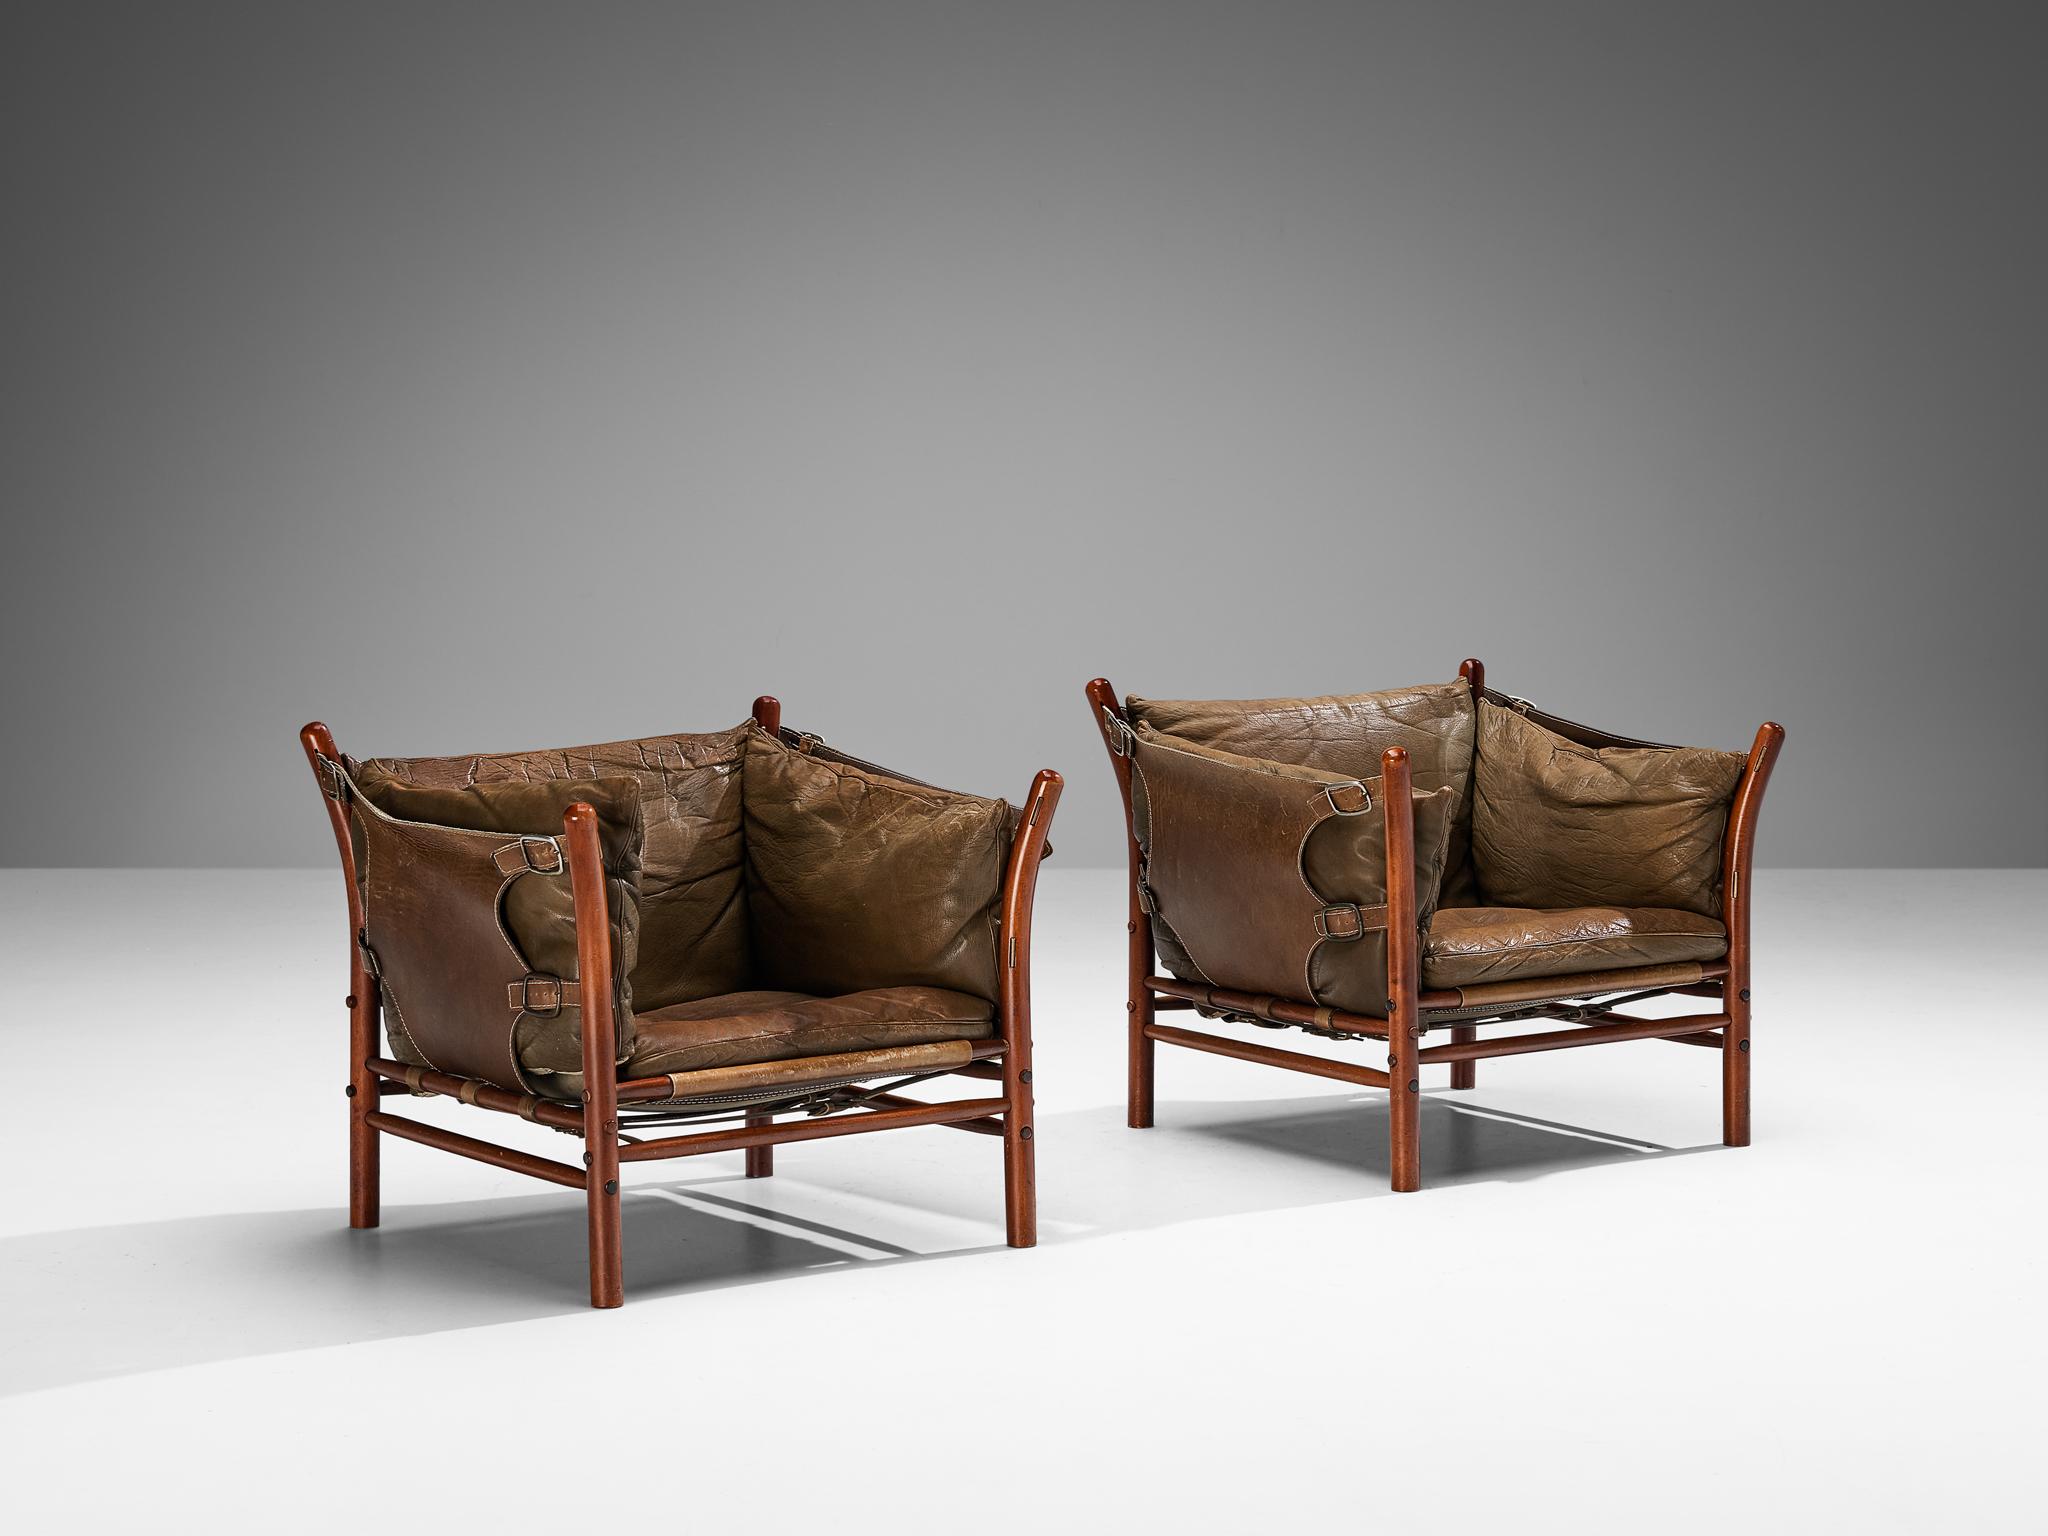 Arne Norell for Norell Möbler AB, 'Ilona' lounge chair, beech, leather, Sweden, 1960s. 

Very nice contrasting pair of easy chairs by Arne Norell designed in the 1960s. These chairs are designed with very thick and rich leather which shows a